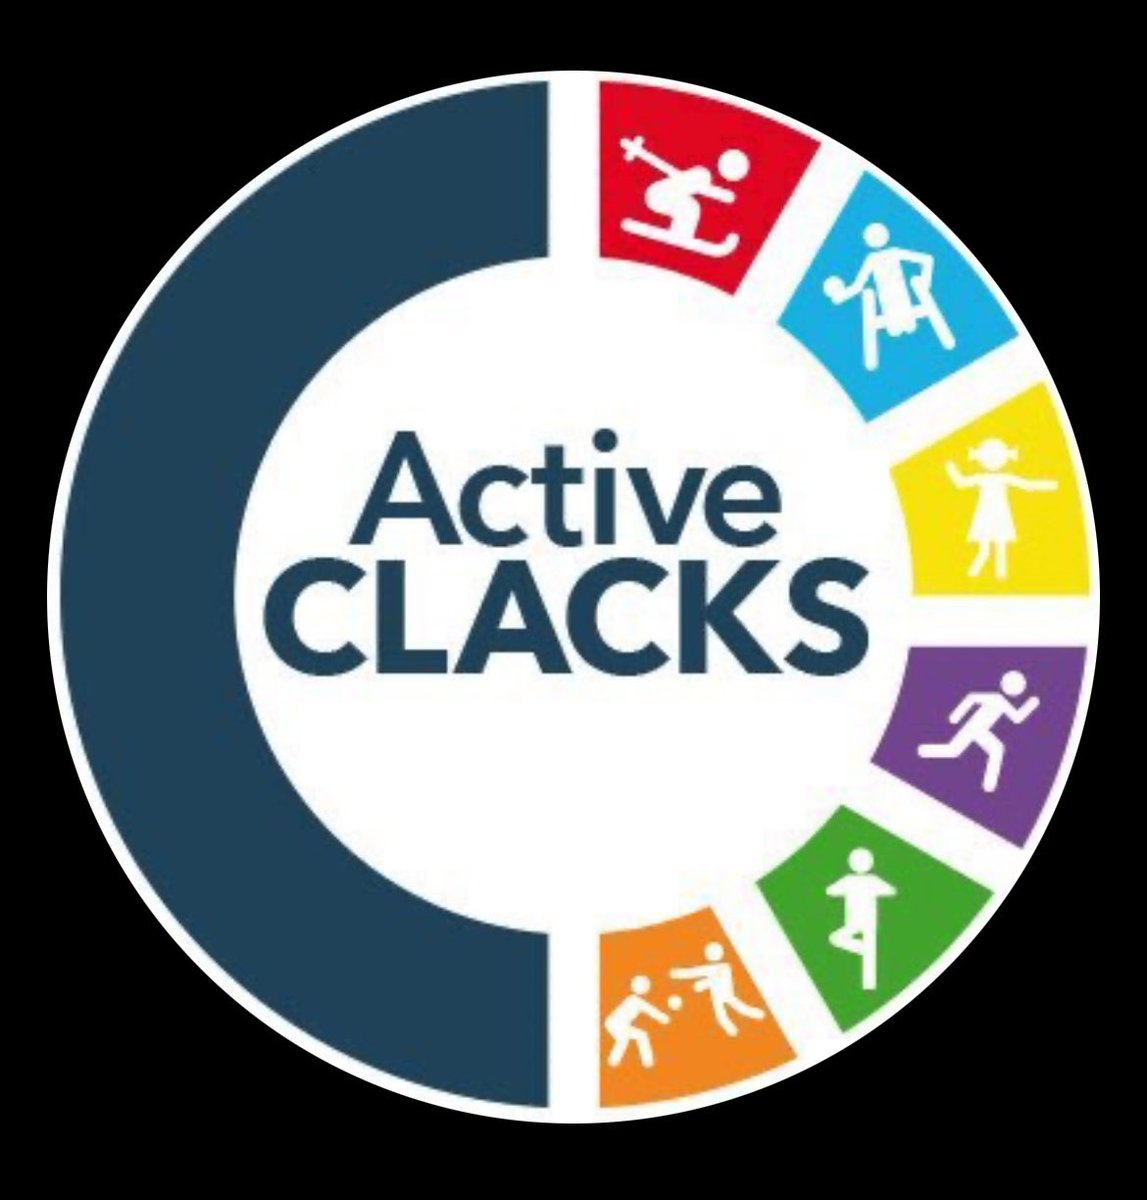 An enjoyable day with the @ActiveClacks team yesterday facilitating exciting discussions. 

Hope you all had fun evening pickleball tournament!